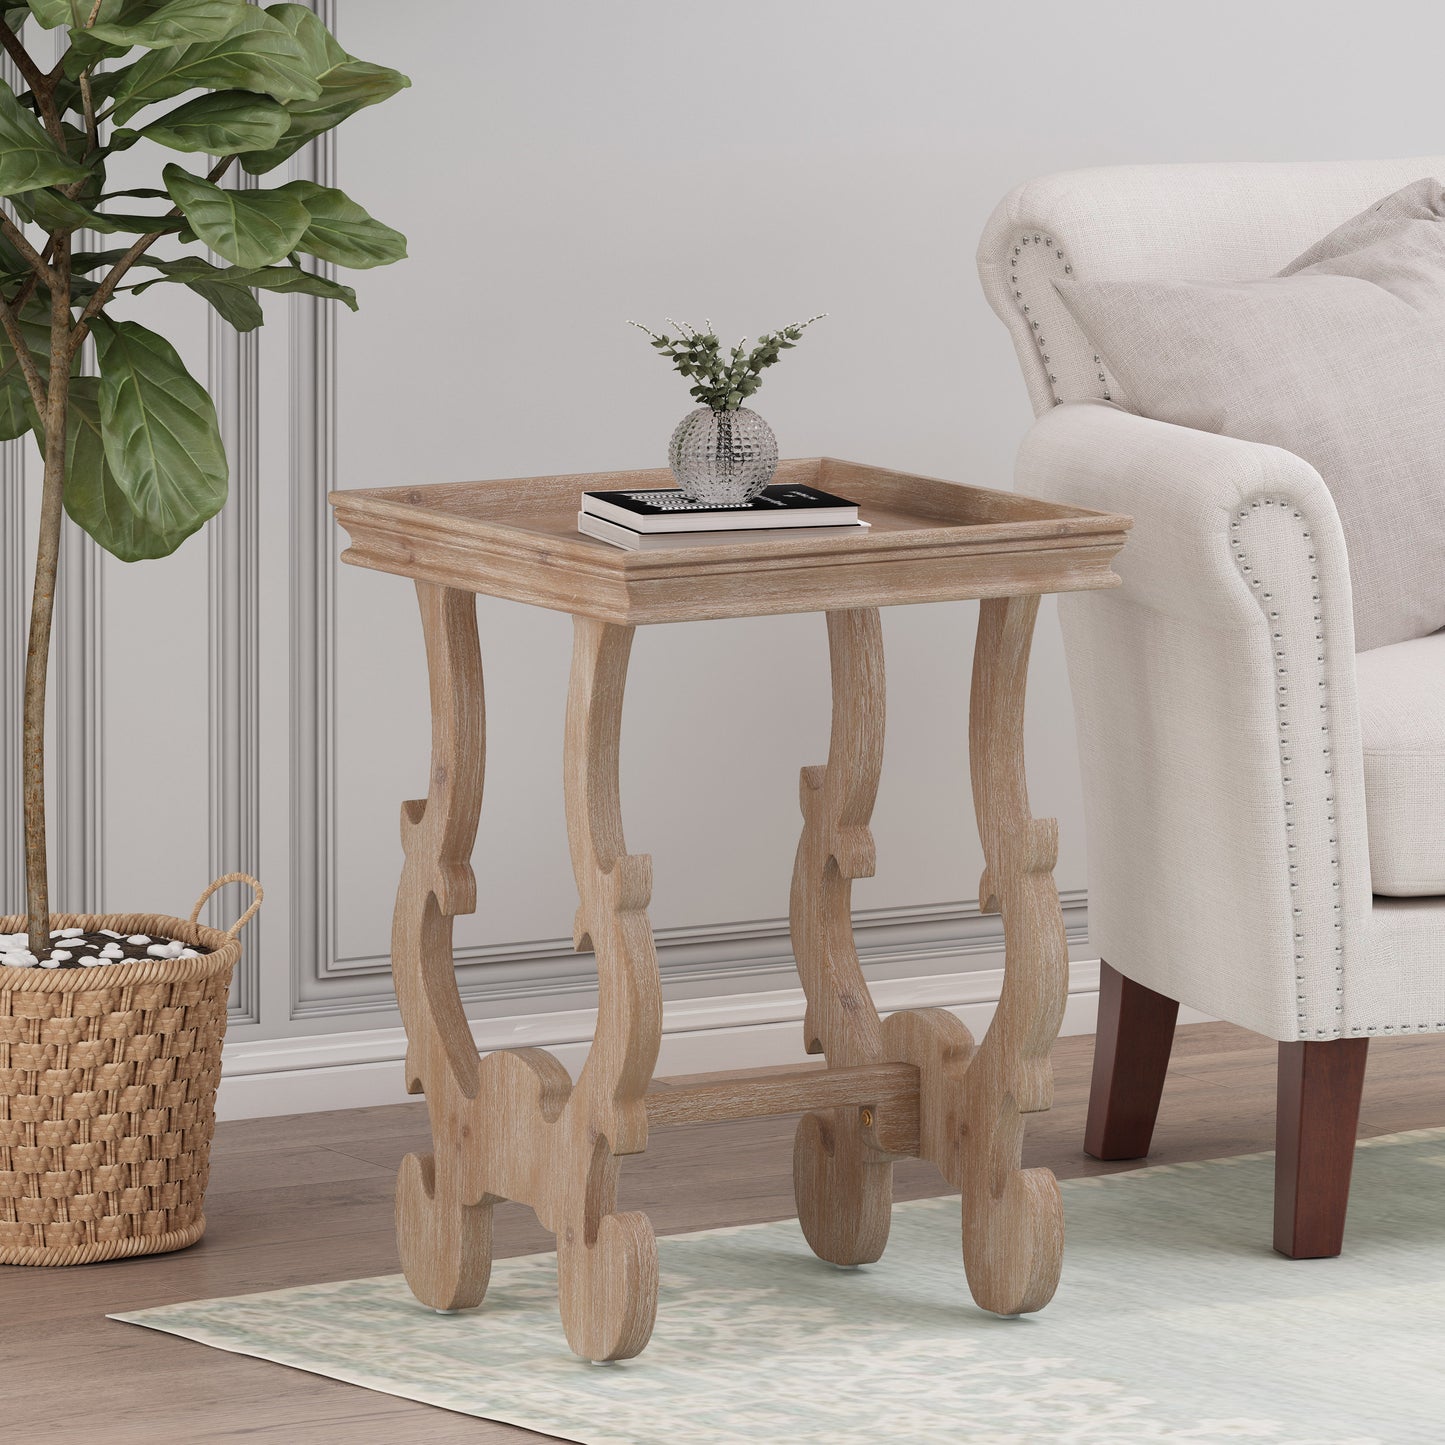 Joplin French Country Accent Table with Square Top